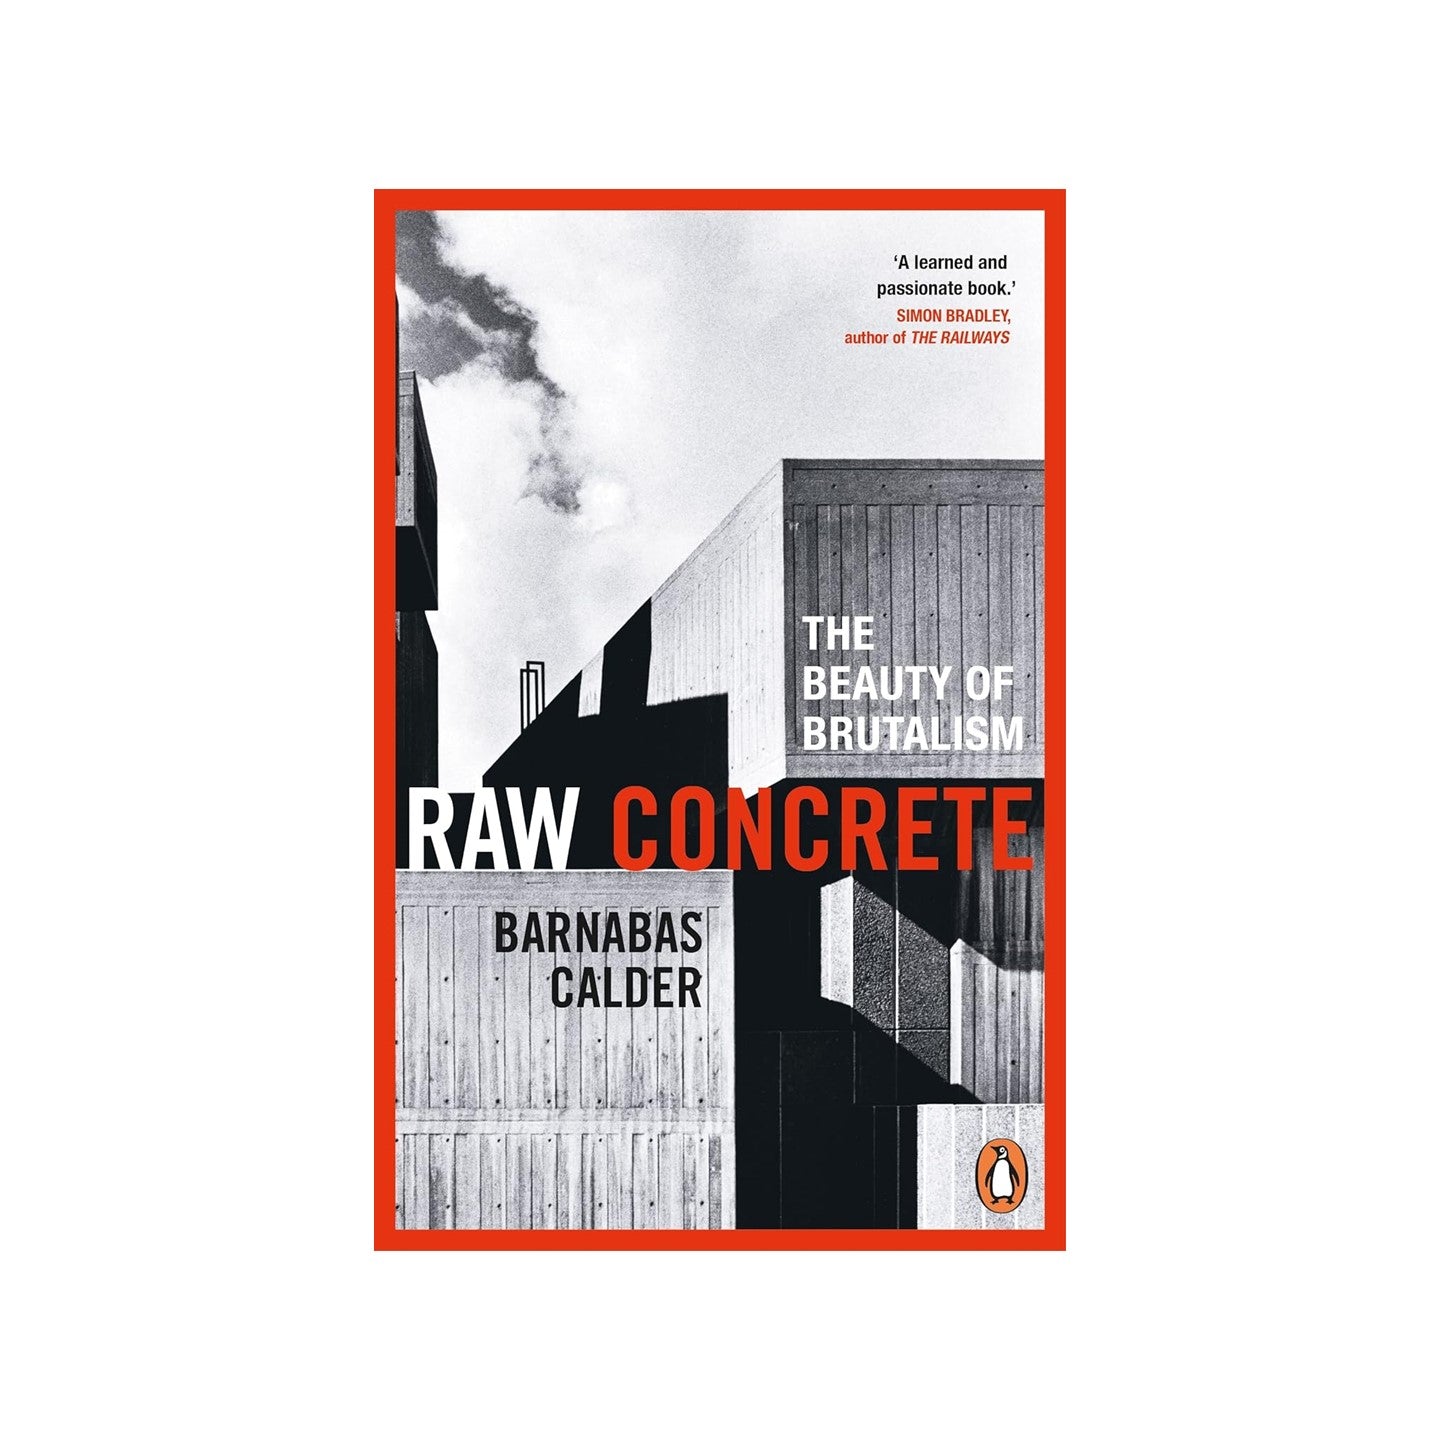 Raw Concrete: The Beauty of Brutalism by Barnabas Calder